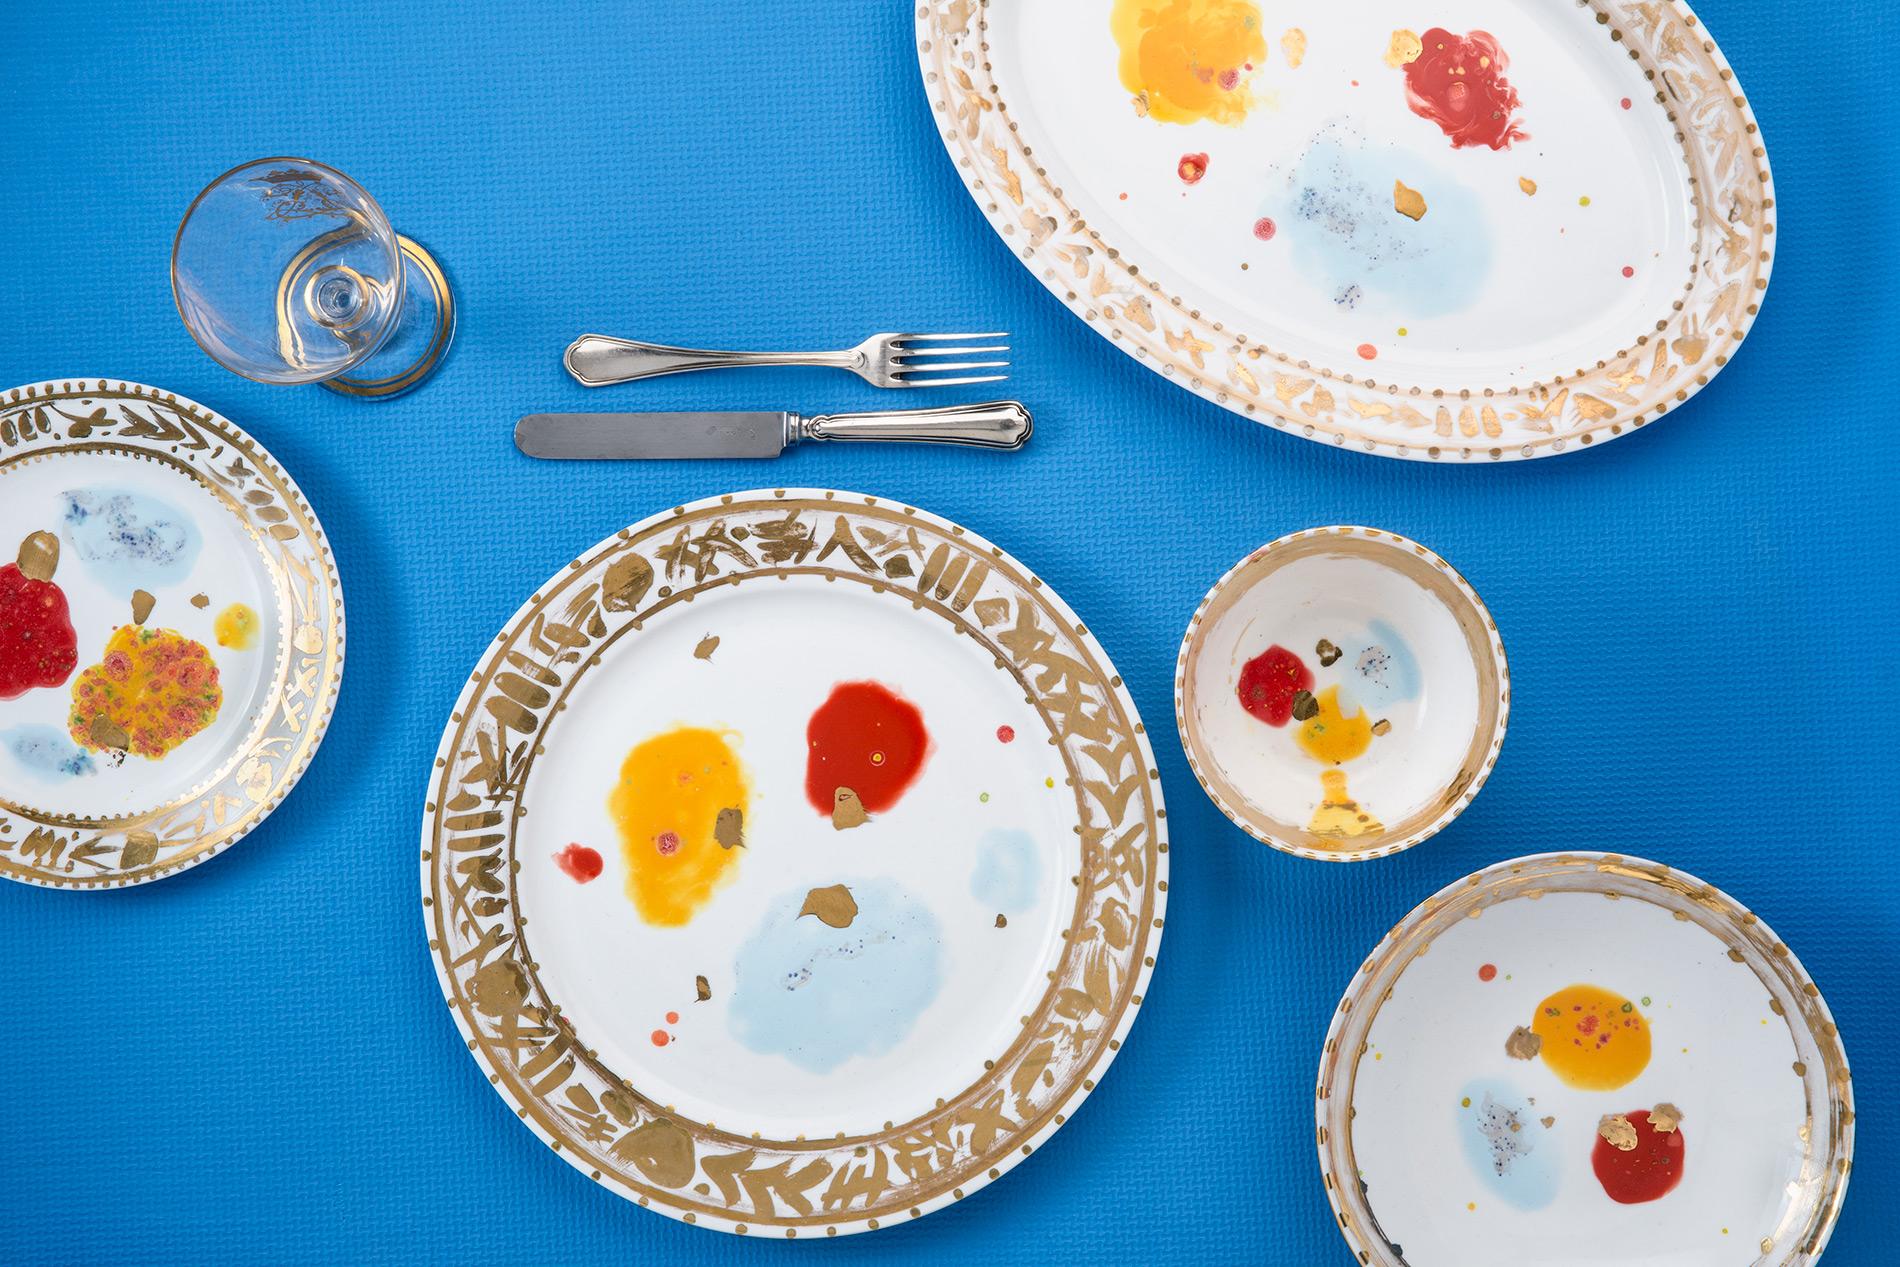 Handcrafted in Italy from the finest porcelain, this Caravaggio Oval Rim Plate underlines tradition thanks to its expressive decoration of big red, yellow and light-blue splotches, where passions are contained in a rich gold rim with classic